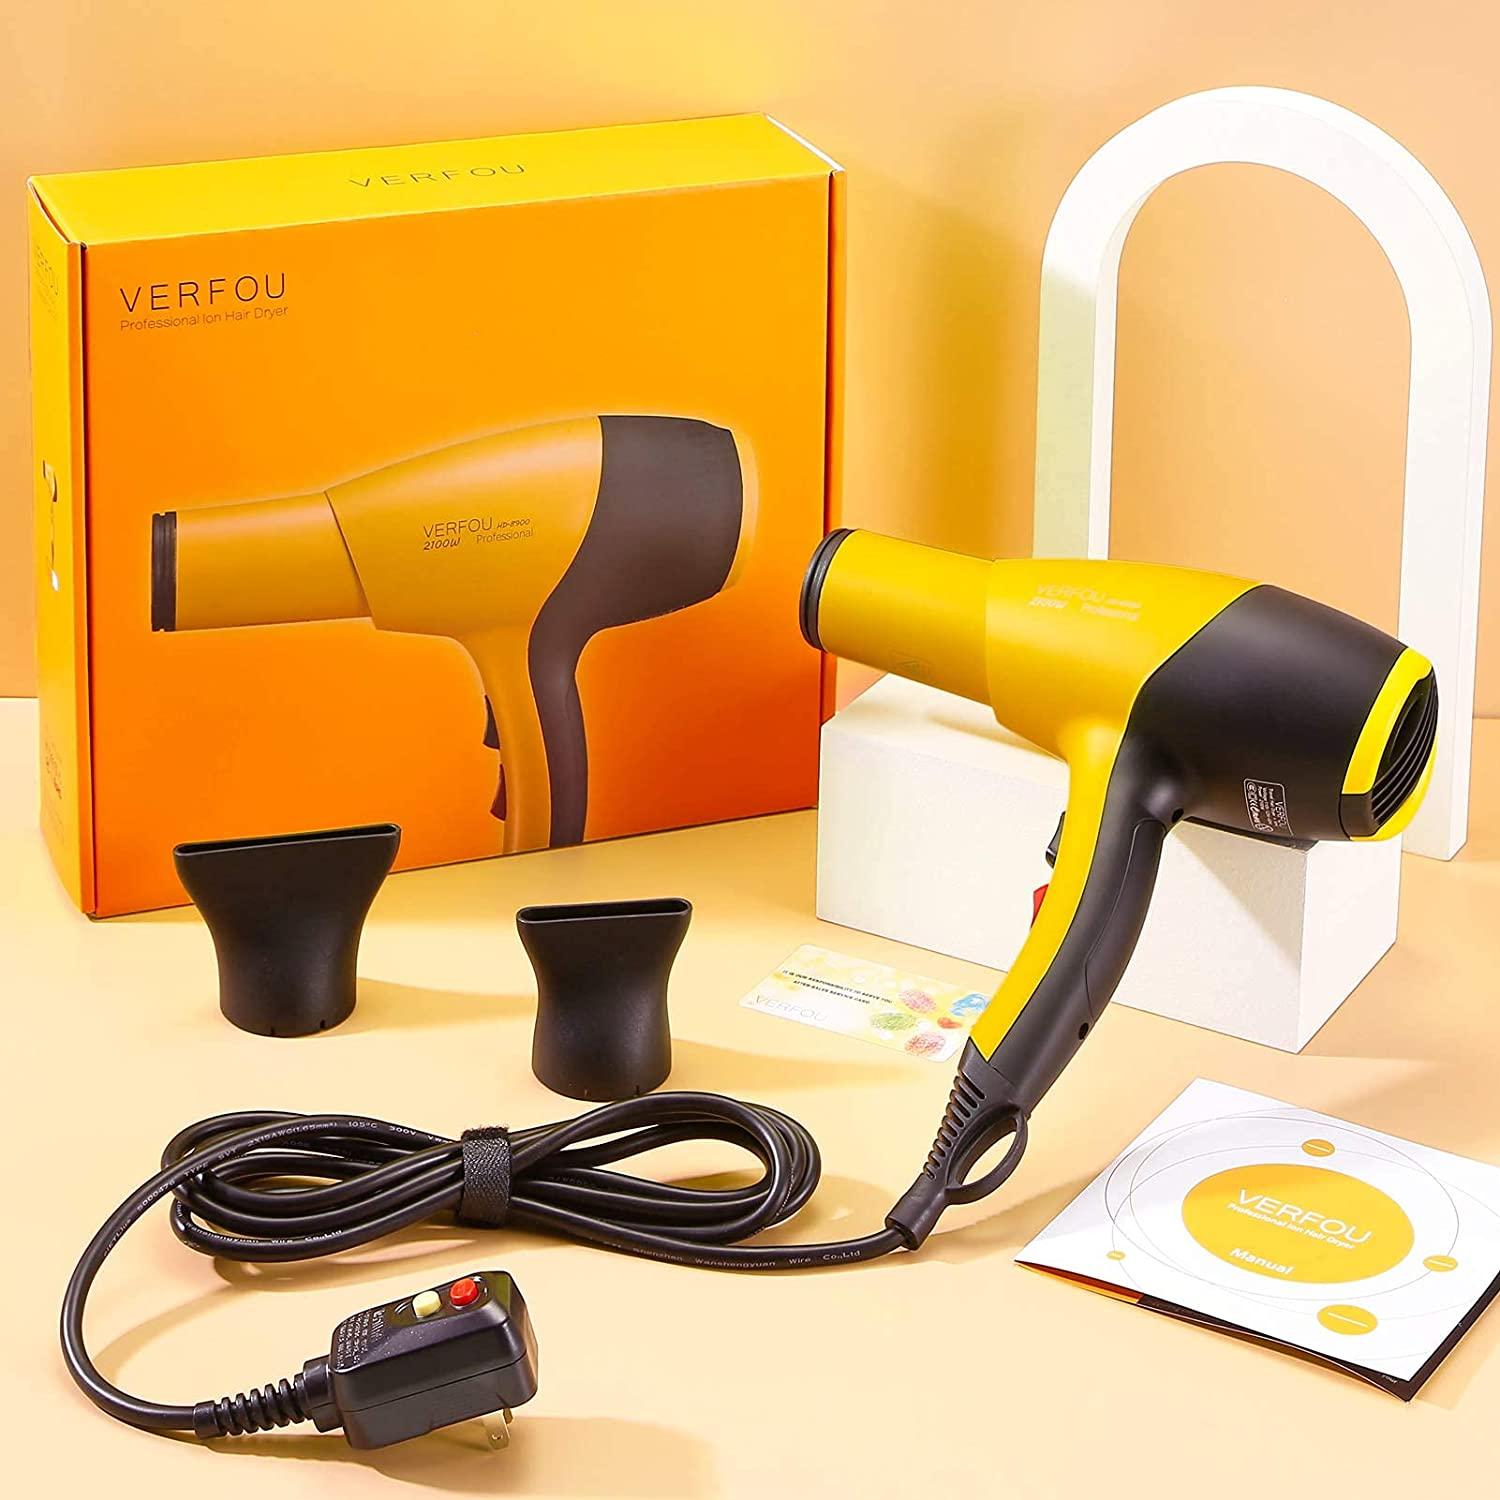 Professional Hair Dryer, Ionic Hair Dryer AC 2100W, Best Fast Drying Hair  Dryer with Ceramic +Tourmaline Technology Nozzle with GFCI Low Noise Long  Life (Yellow)